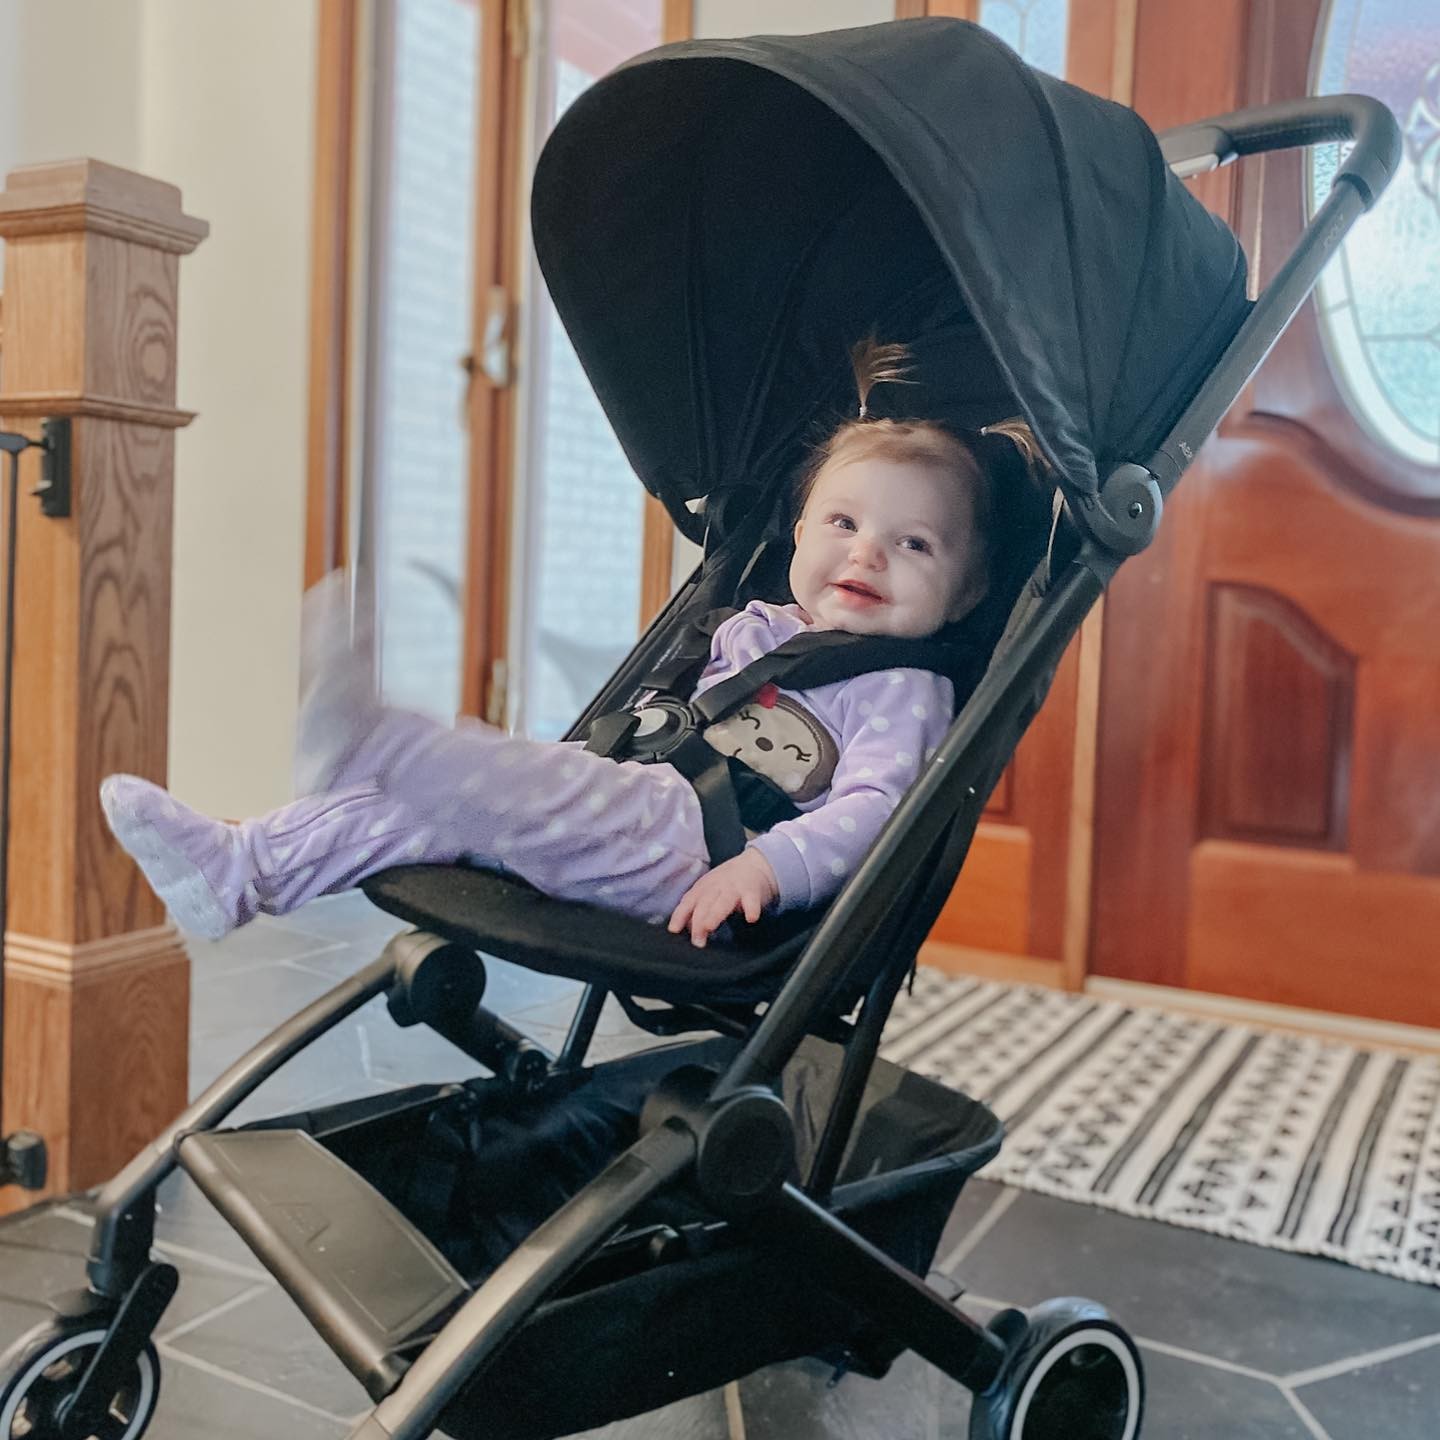 Ready for a mini getaway with our @myjoolz Aer. Can you believe this compact stroller folds up flat and can be stored in most airlines carry on compartments! #ittybittyatlas . . . #parenthood #mamahood #michiganinfluencer #teachingbabies #babyweaning #grandrapids #wtebabies #miadventures #westmi #growwithme #mommyandme #adventureswithyou #mibabies #parentlife #motherhood #fatherhood #sleeptraining #mamasofinstagram #mamablogger #igmama #michiganders #westmichigan #allaboutbabies #babyhood #myjoolz #travelgram